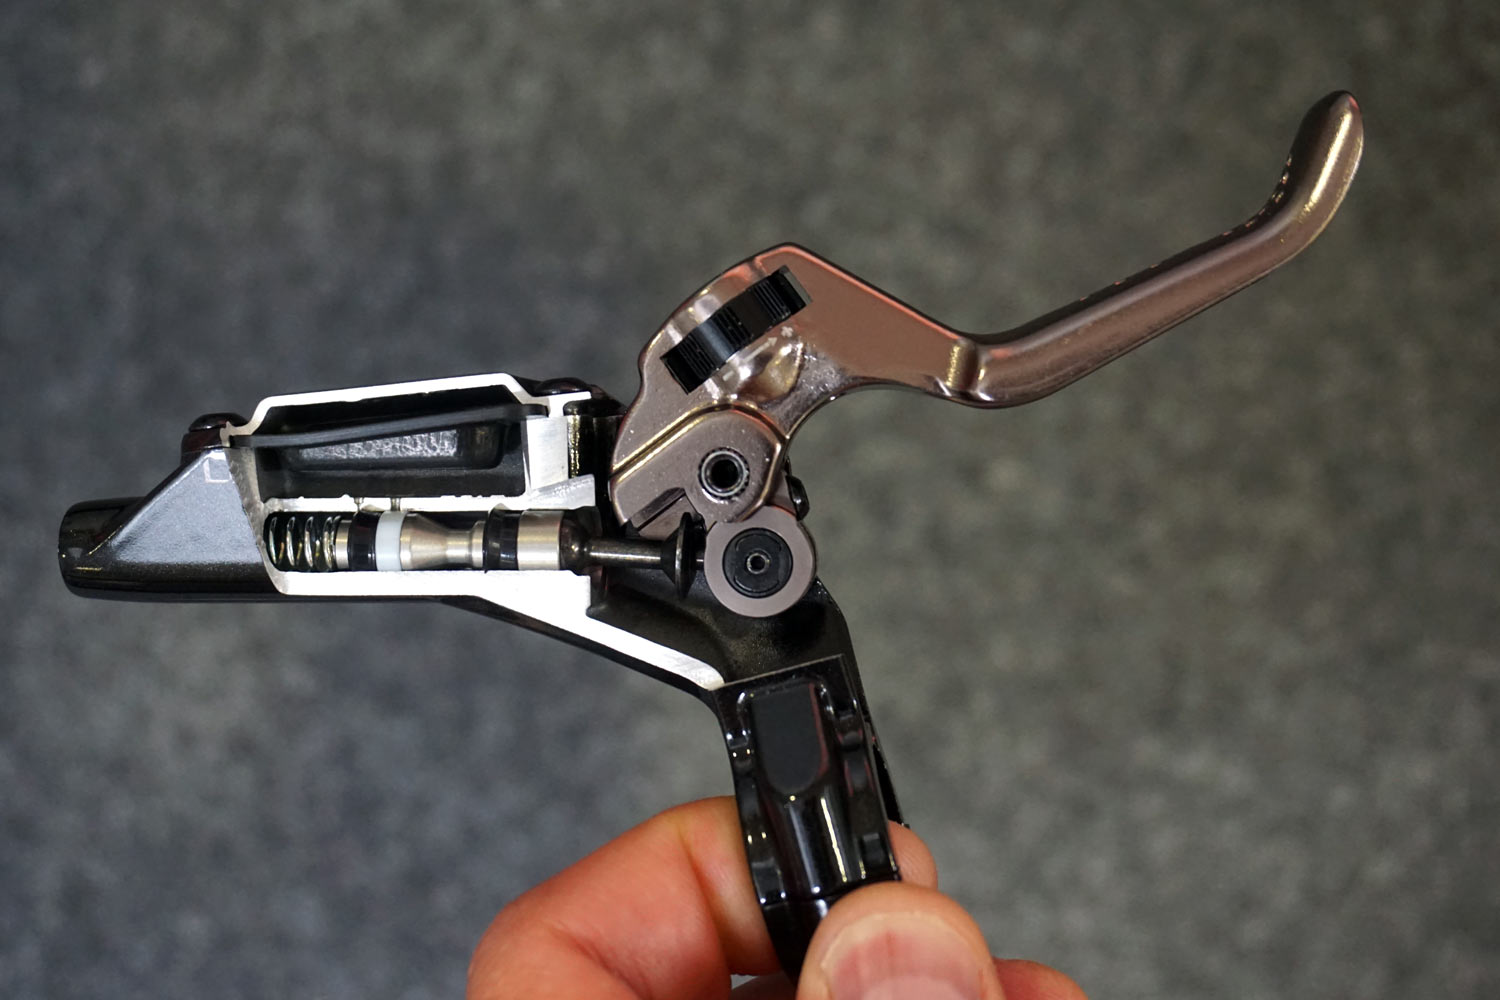 Hayes Dominion hydraulic disc brake tech details and cutaway images shows how they work